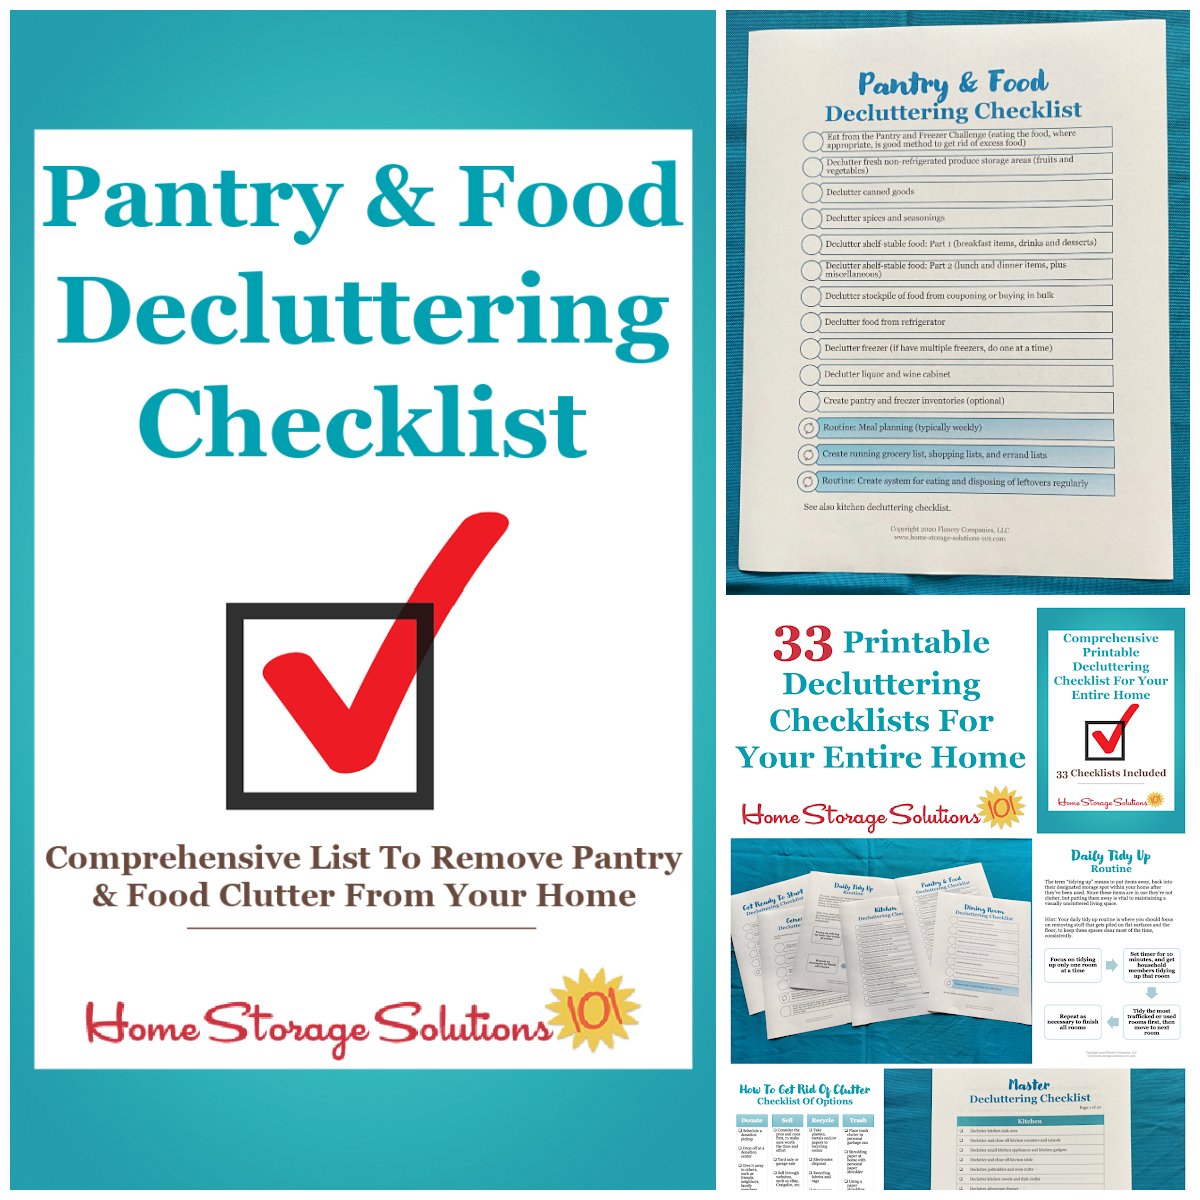 Grocery List Tips: Build a Pantry List to Grocery Shop in Reverse